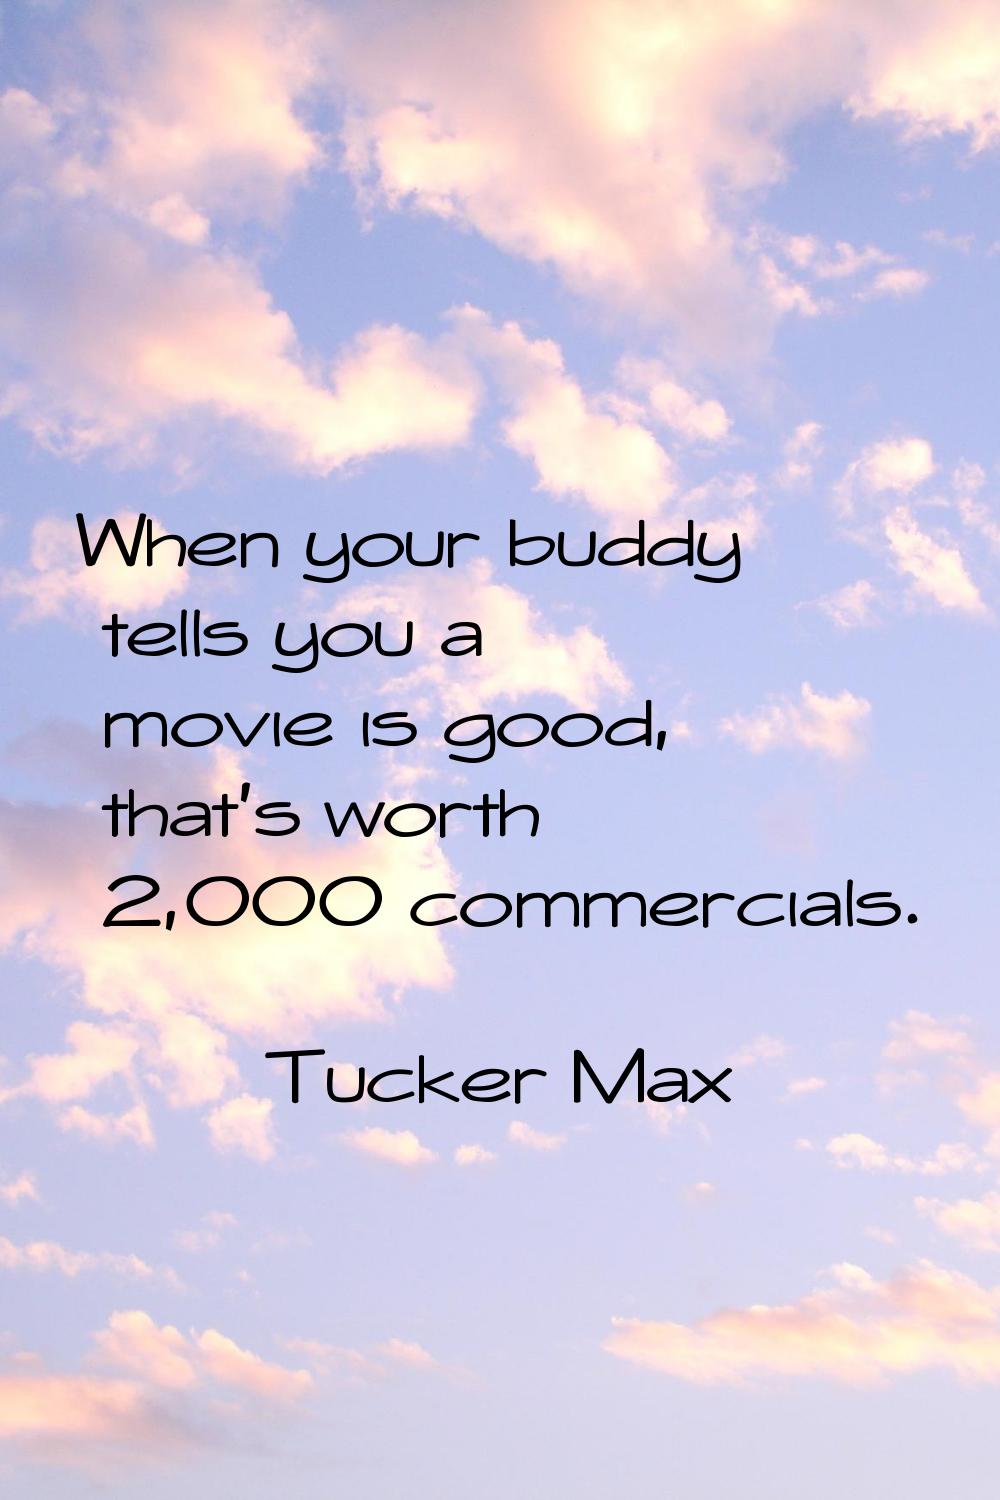 When your buddy tells you a movie is good, that's worth 2,000 commercials.